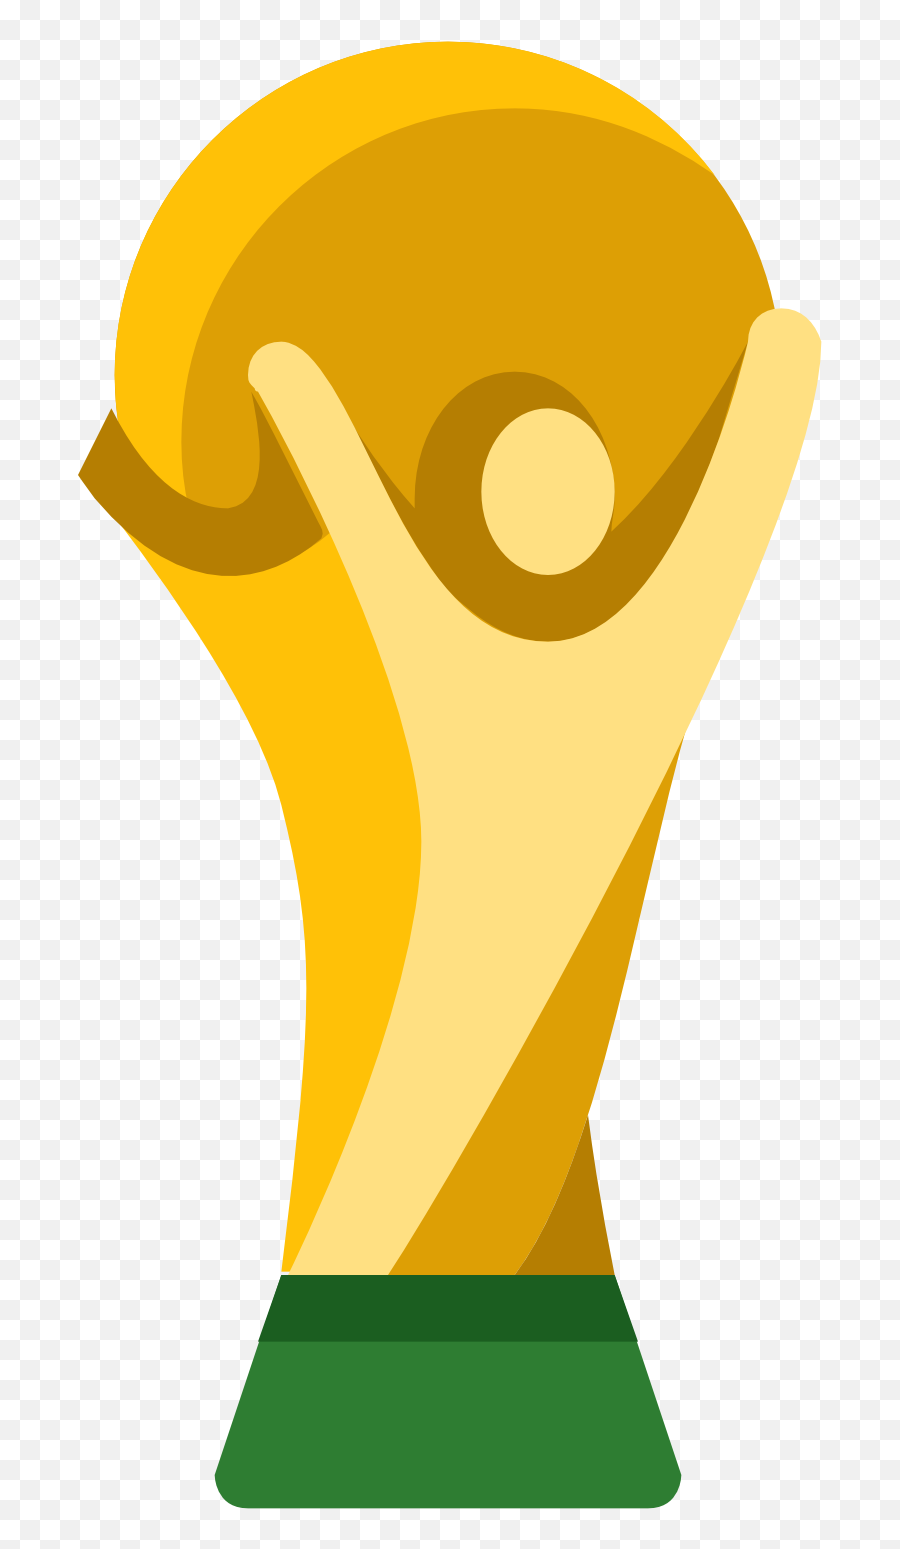 World Cup Trophy Png - World Cup Trophy Clip Art,World Cup Trophy Png